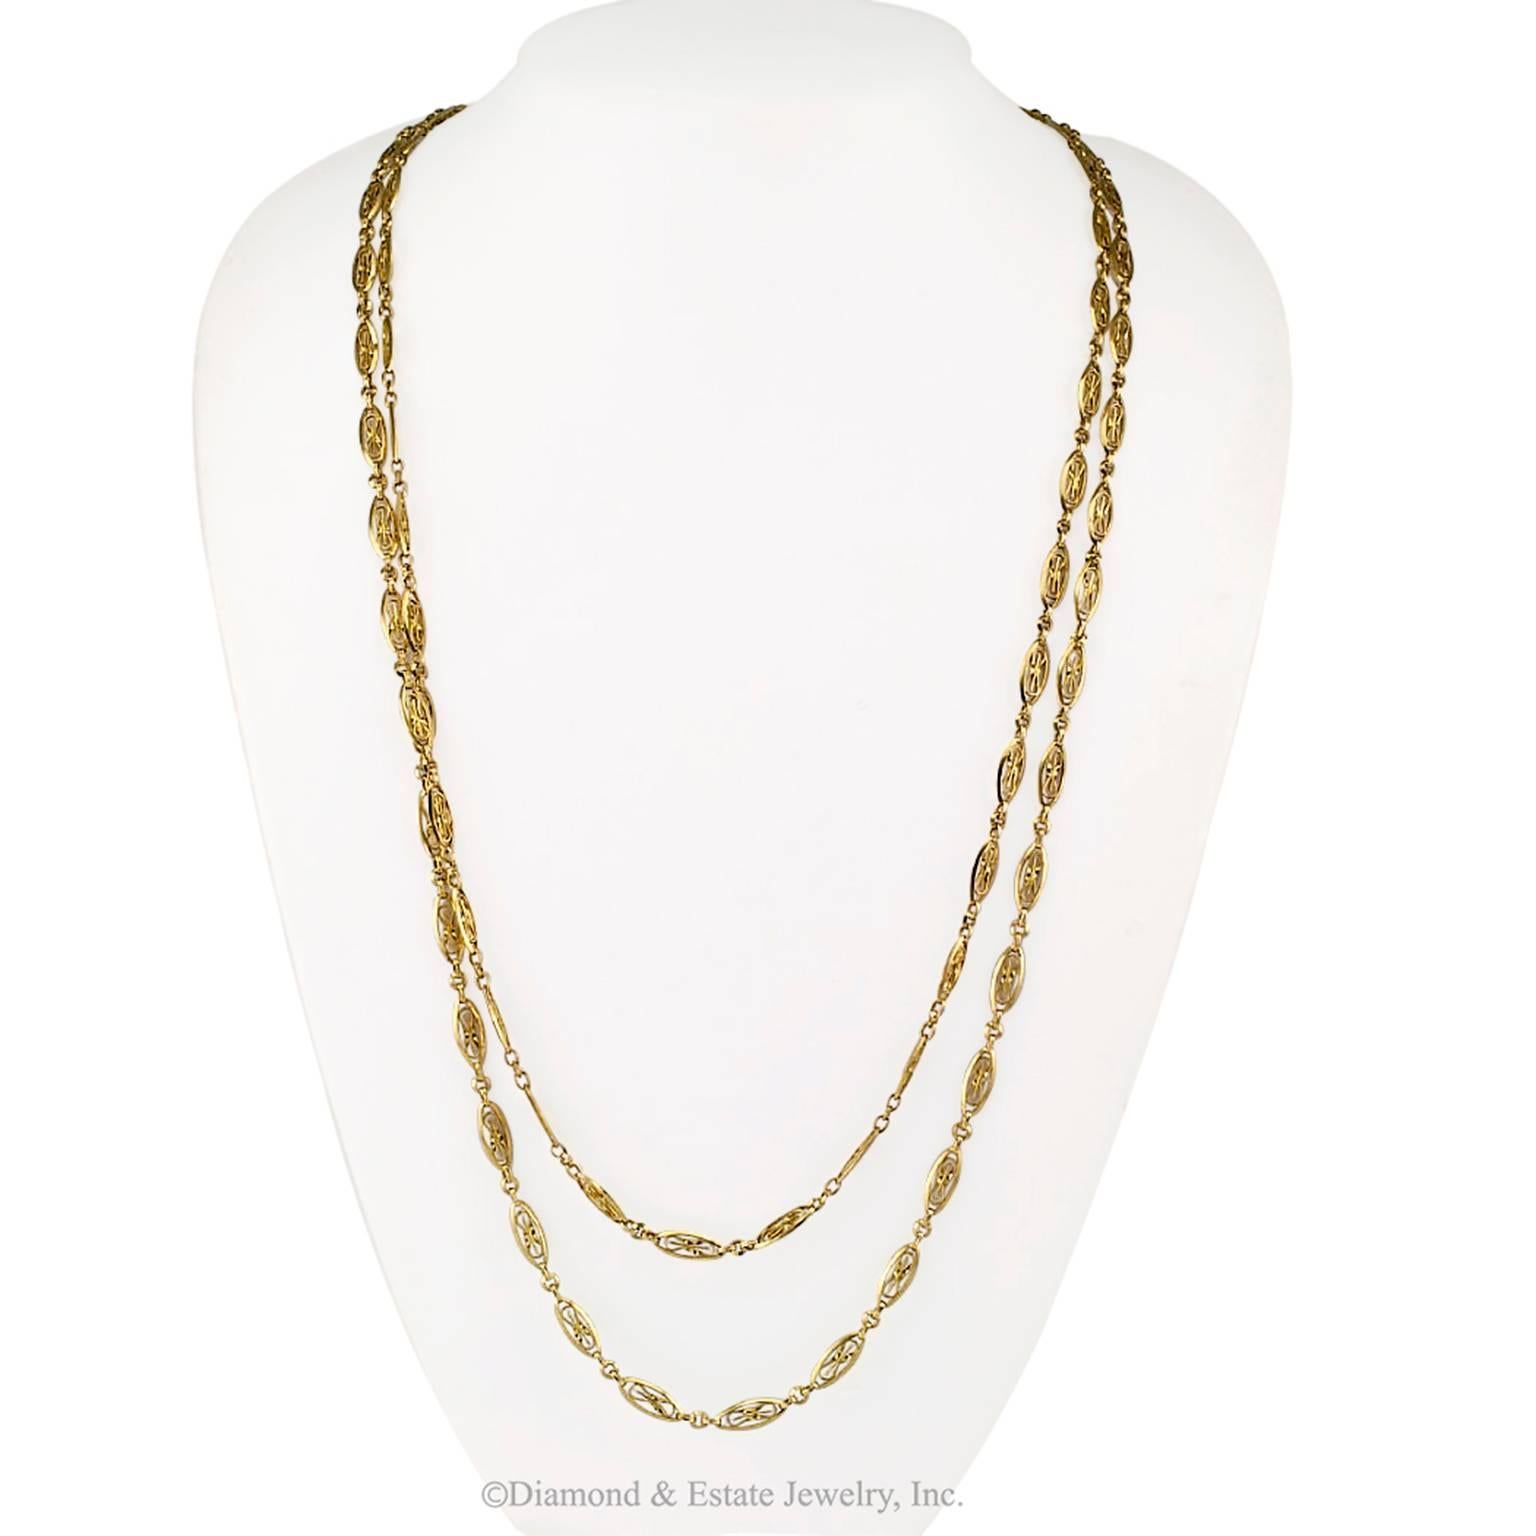 French Antique 1905 Long Chain Necklace

French 1905 Art Nouveau 18-karat gold long chain.  A continuous loop of hand made links crafted in 18-karat gold, long enough to wear doubled or even tripled around the neck.  Long chains have always been a